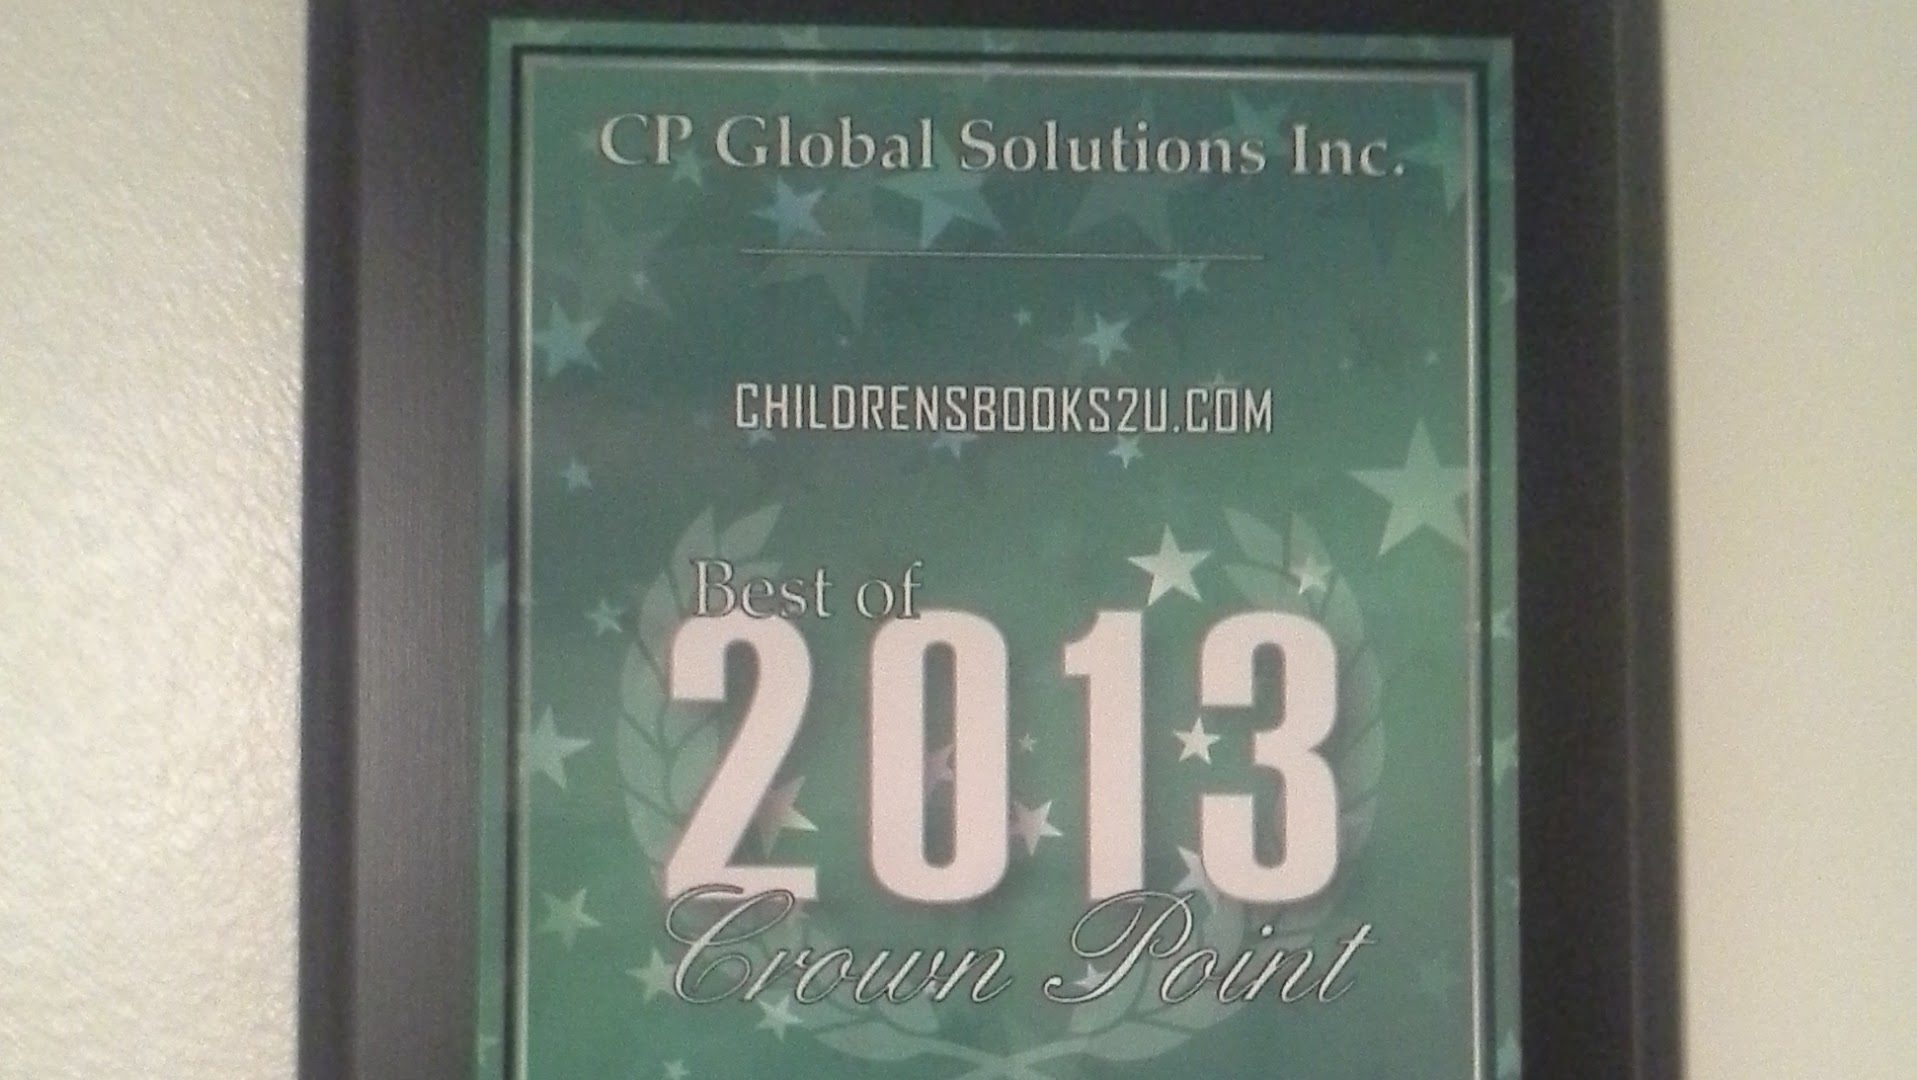 CP GLOBAL SOLUTIONS INC.